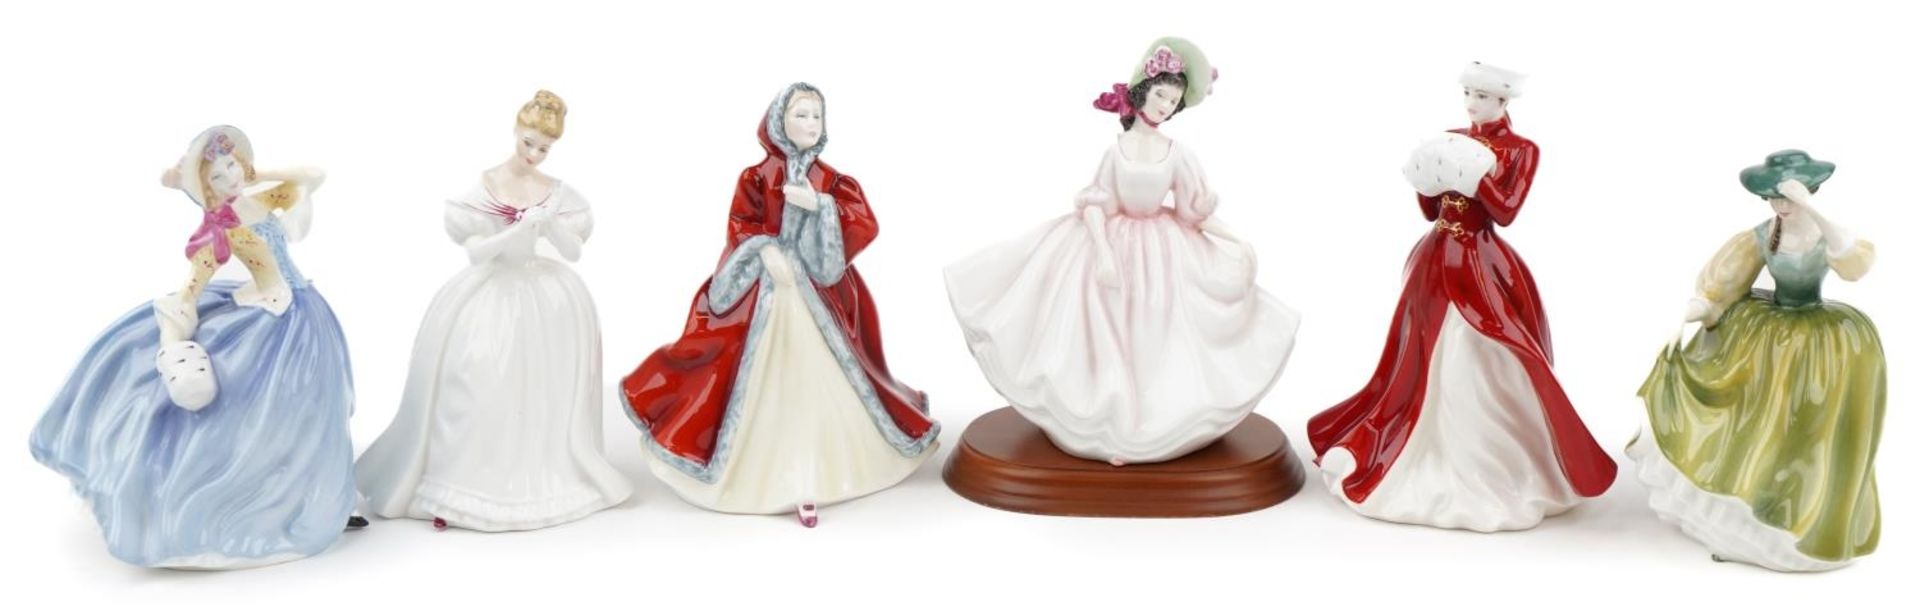 Six Royal Doulton figurines including Denise HN2477, Rachel HN2936 and A Winter's Morn limited